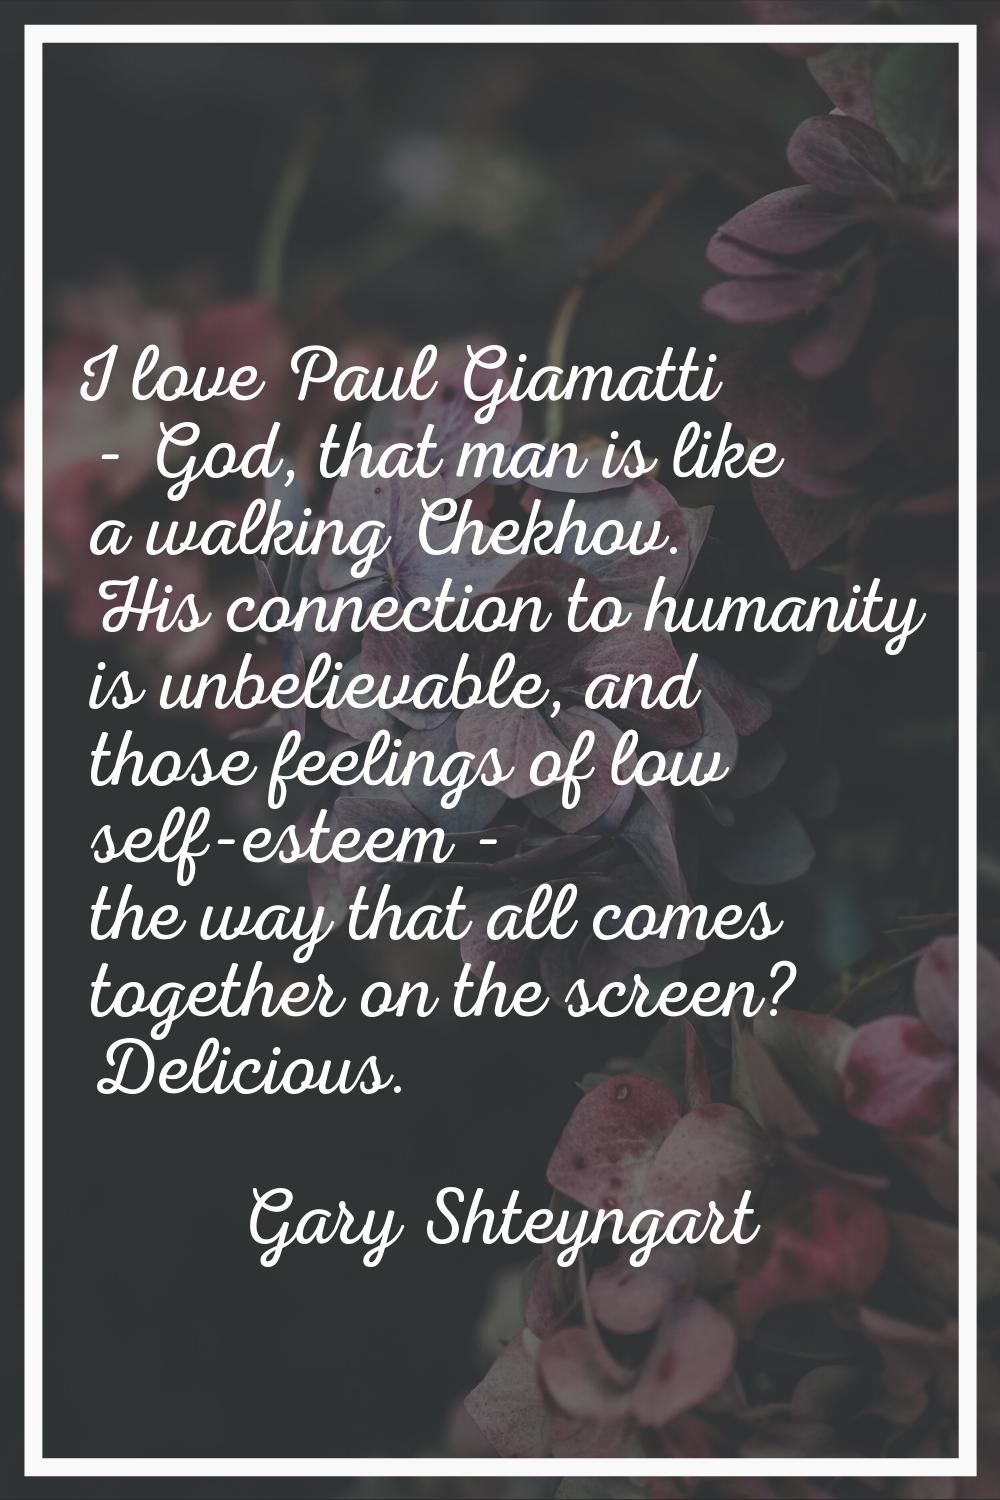 I love Paul Giamatti - God, that man is like a walking Chekhov. His connection to humanity is unbel